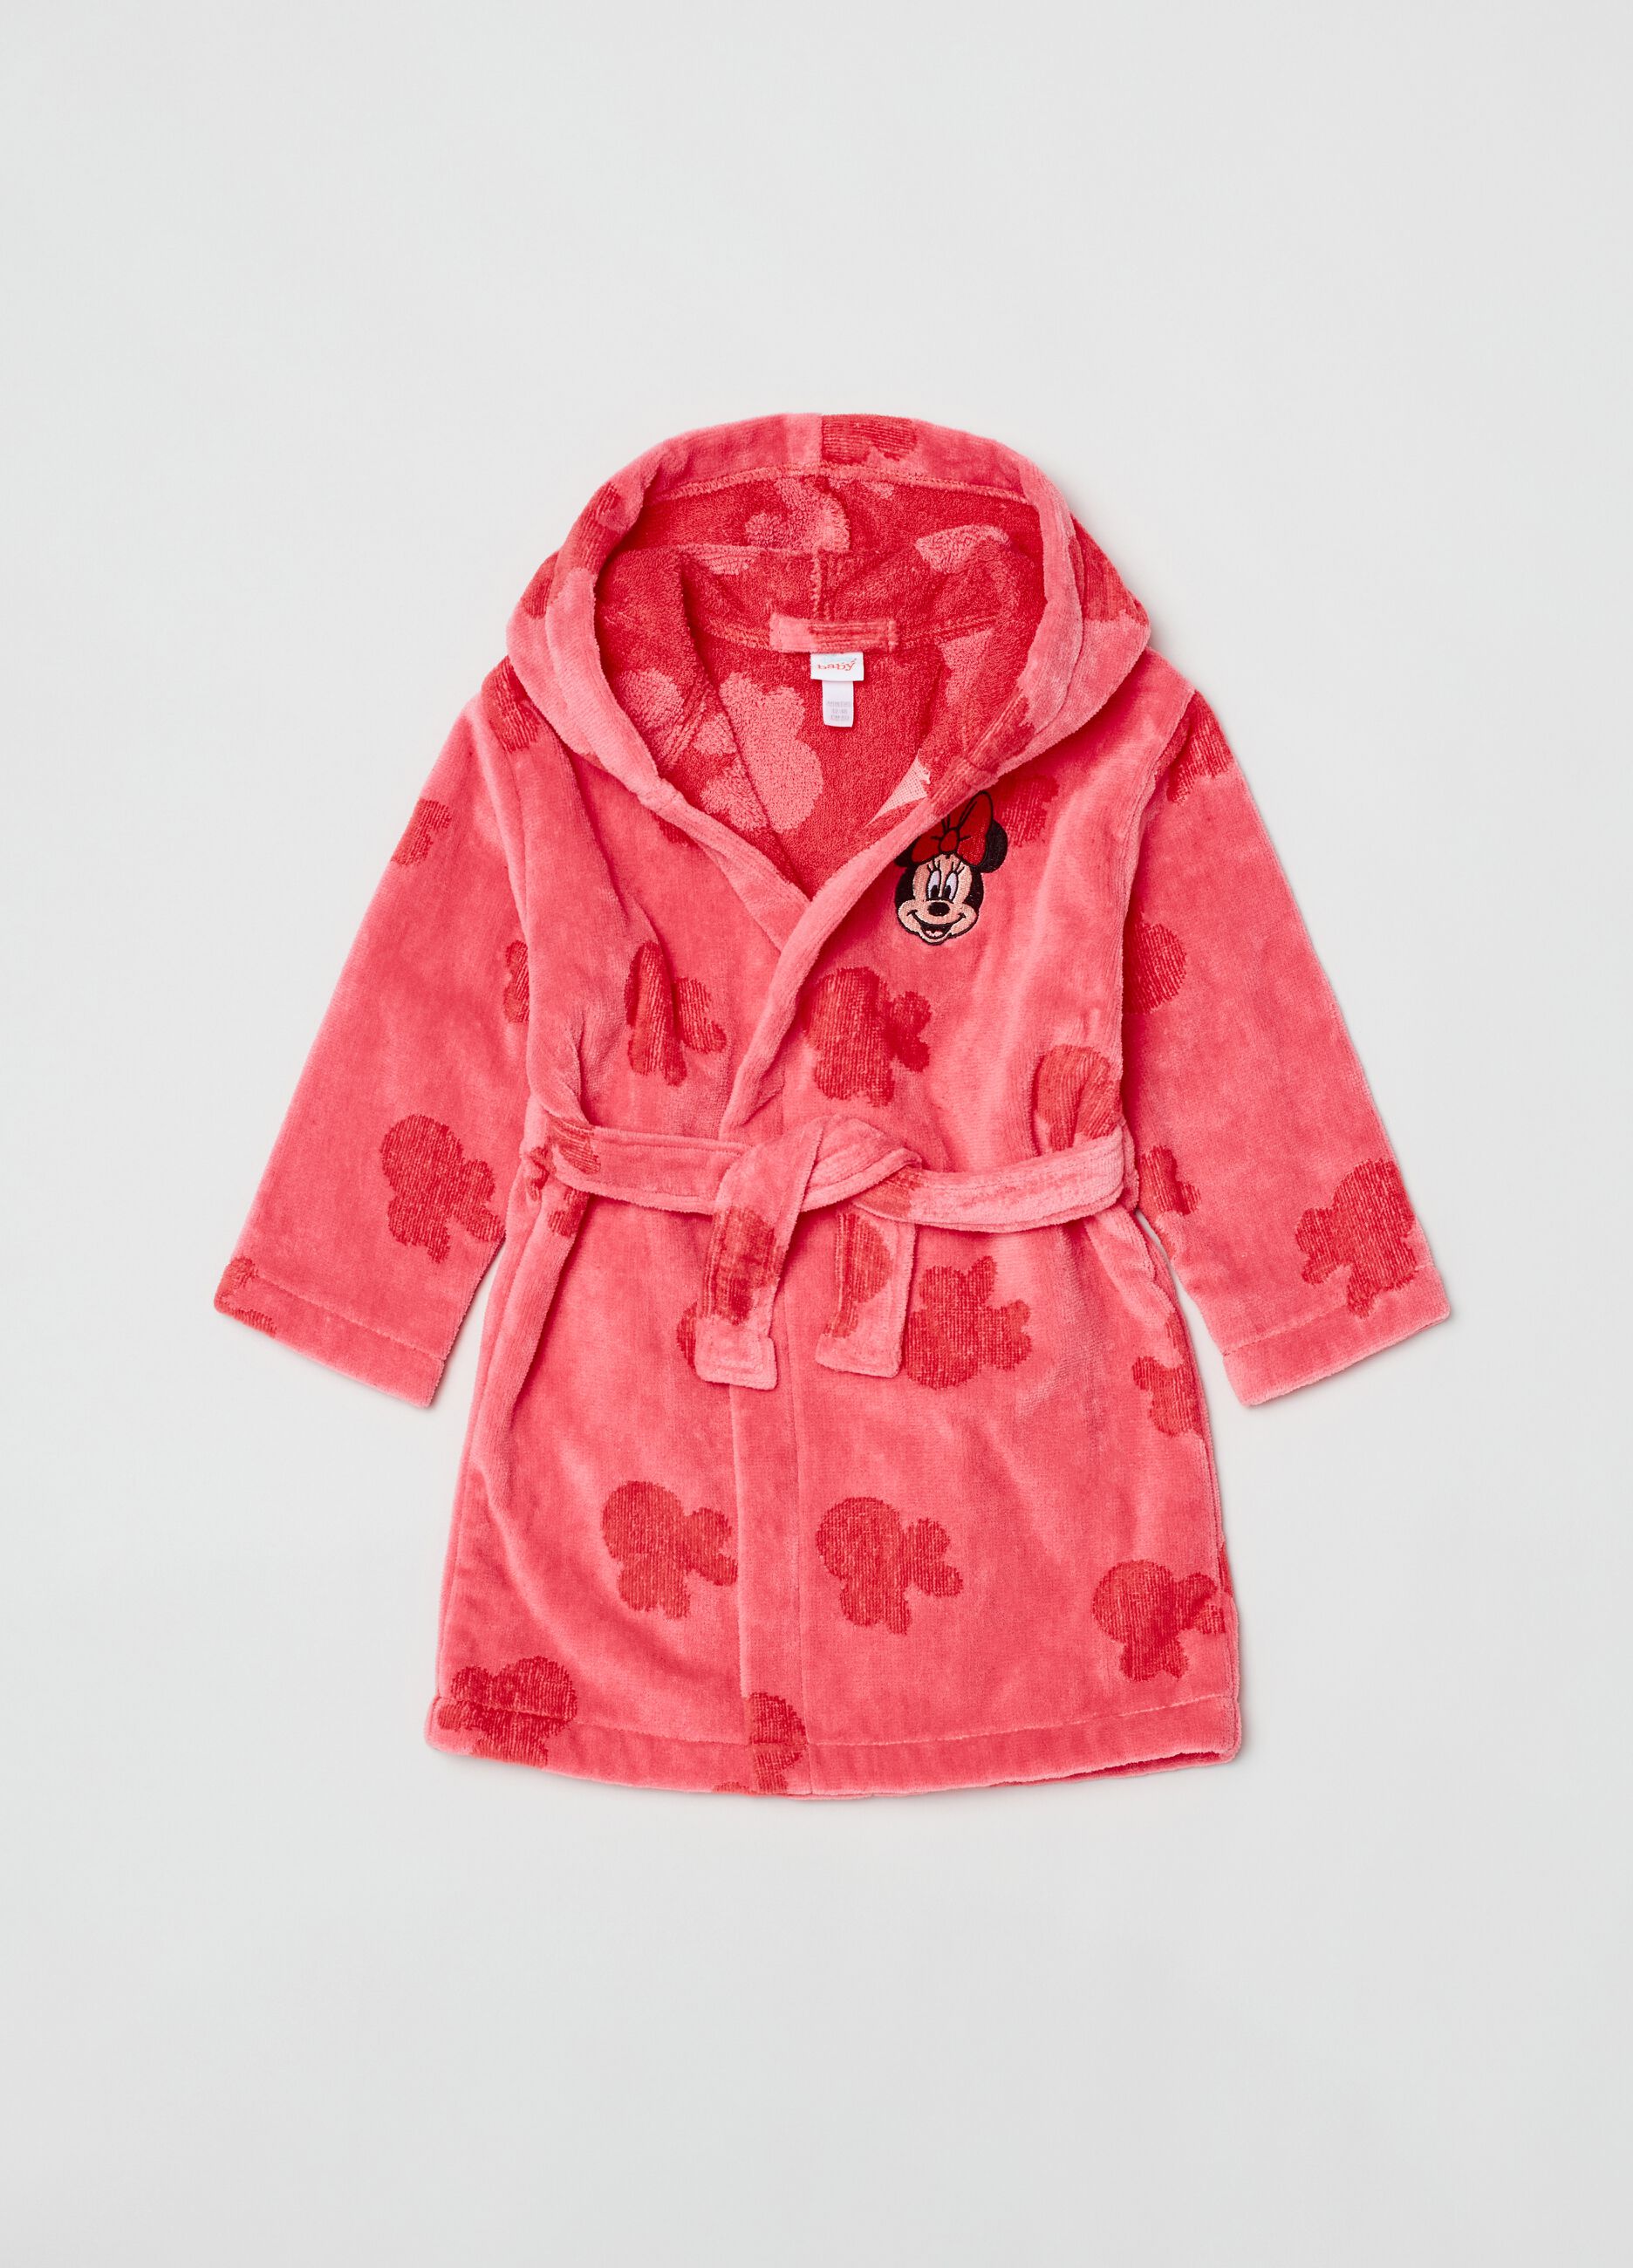 Bathrobe with Disney Baby Minnie Mouse embroidery